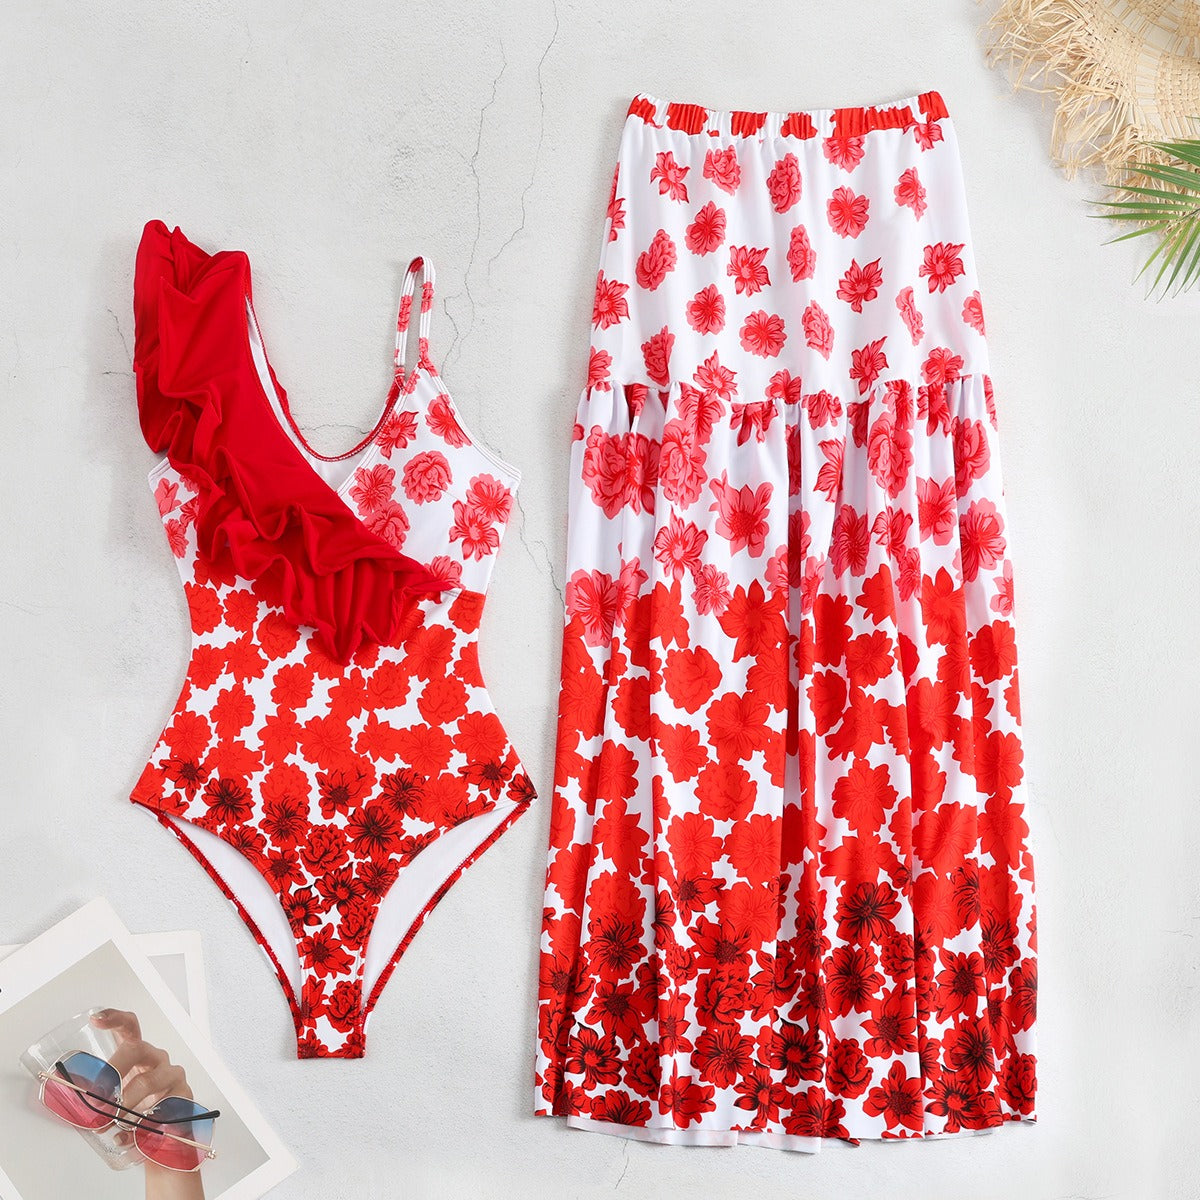 Floral Ruffled One Shoulder One-Piece Swimsuit and Cover Up Skirt